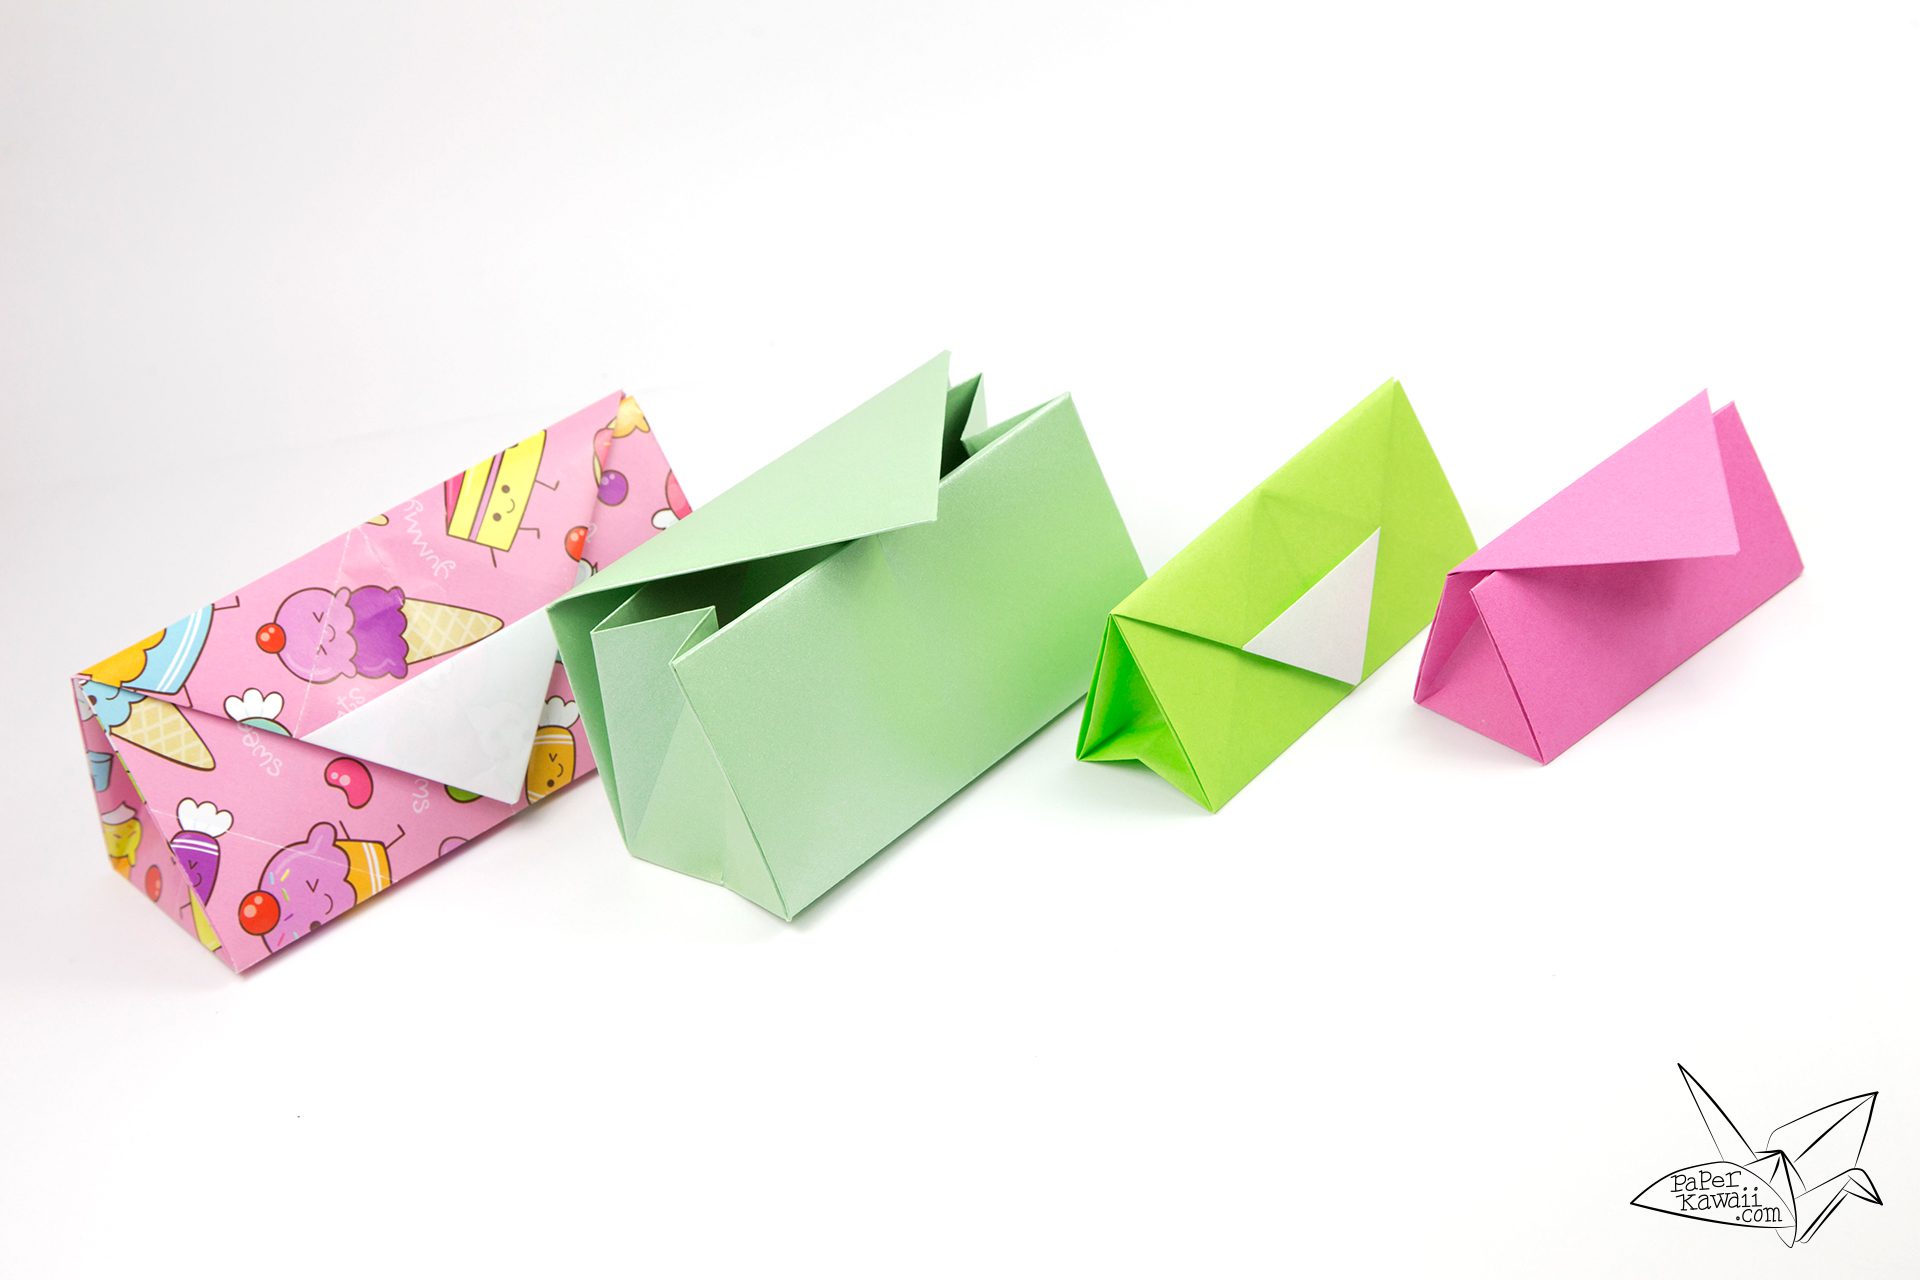 Origami Triangle Pouch FREE sewing pattern (with video) - Sew Modern Bags